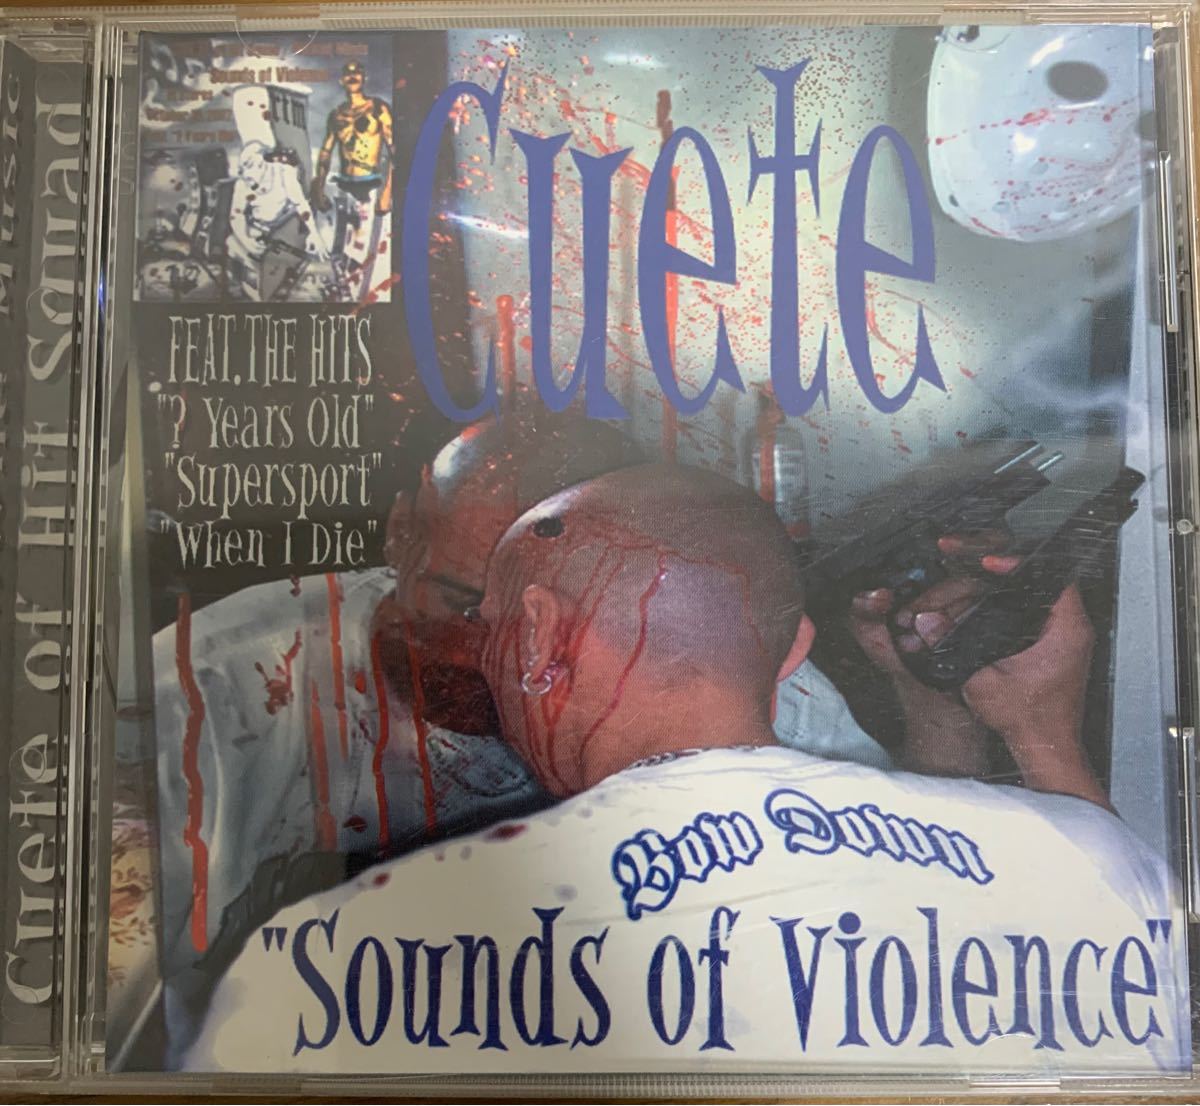 Cuete Sounds Of Violence chicano チカーノ